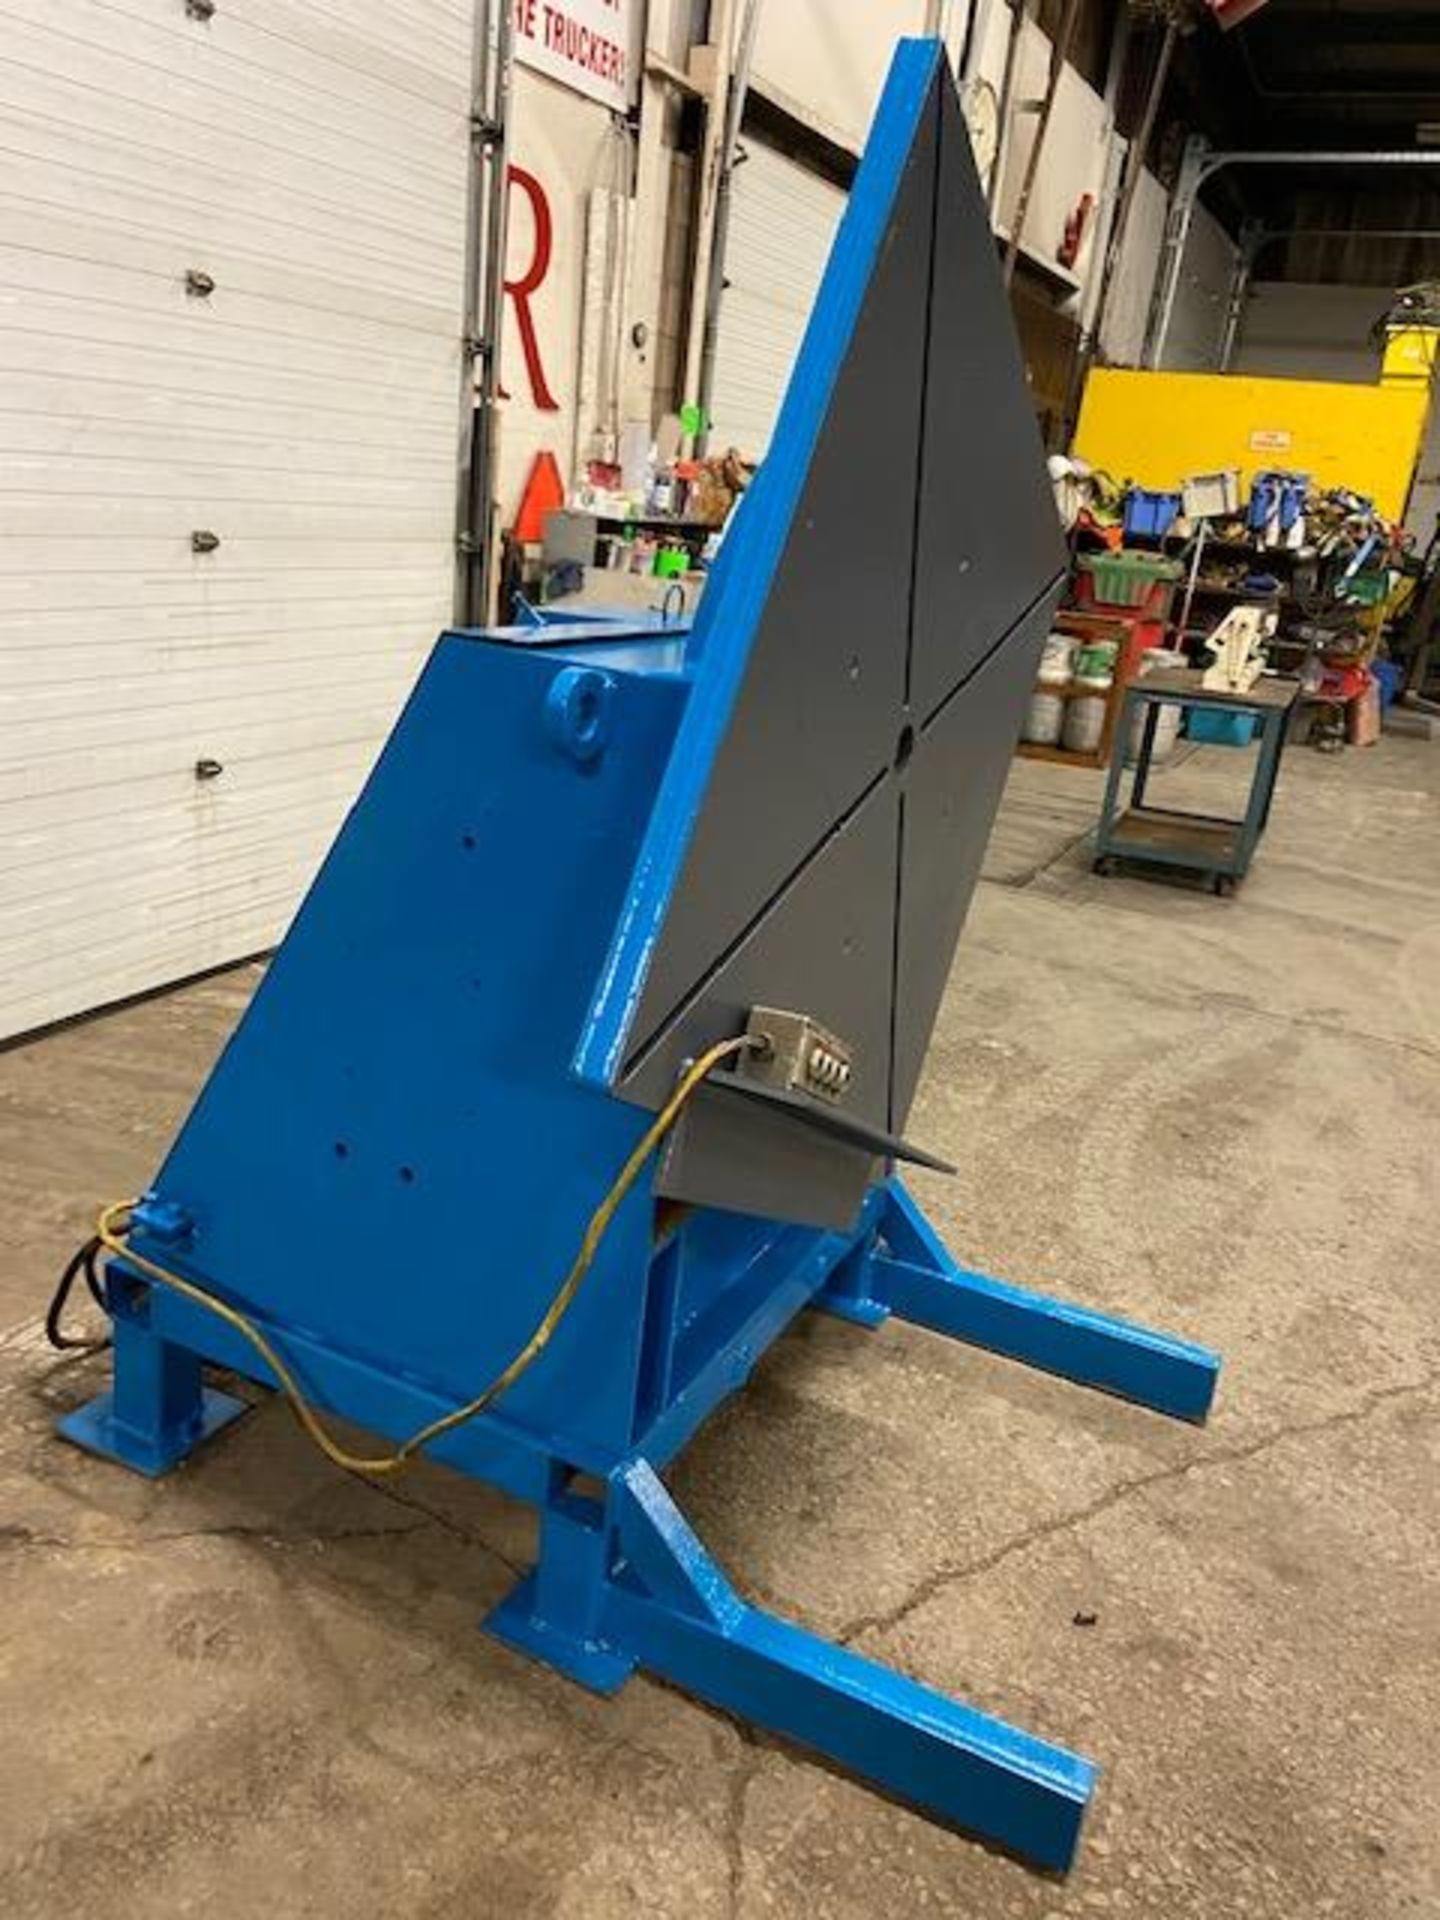 Aronson 7800lbs Welding Positioner Unit - Head Stock Rotator with hand controller pendant - Image 2 of 2